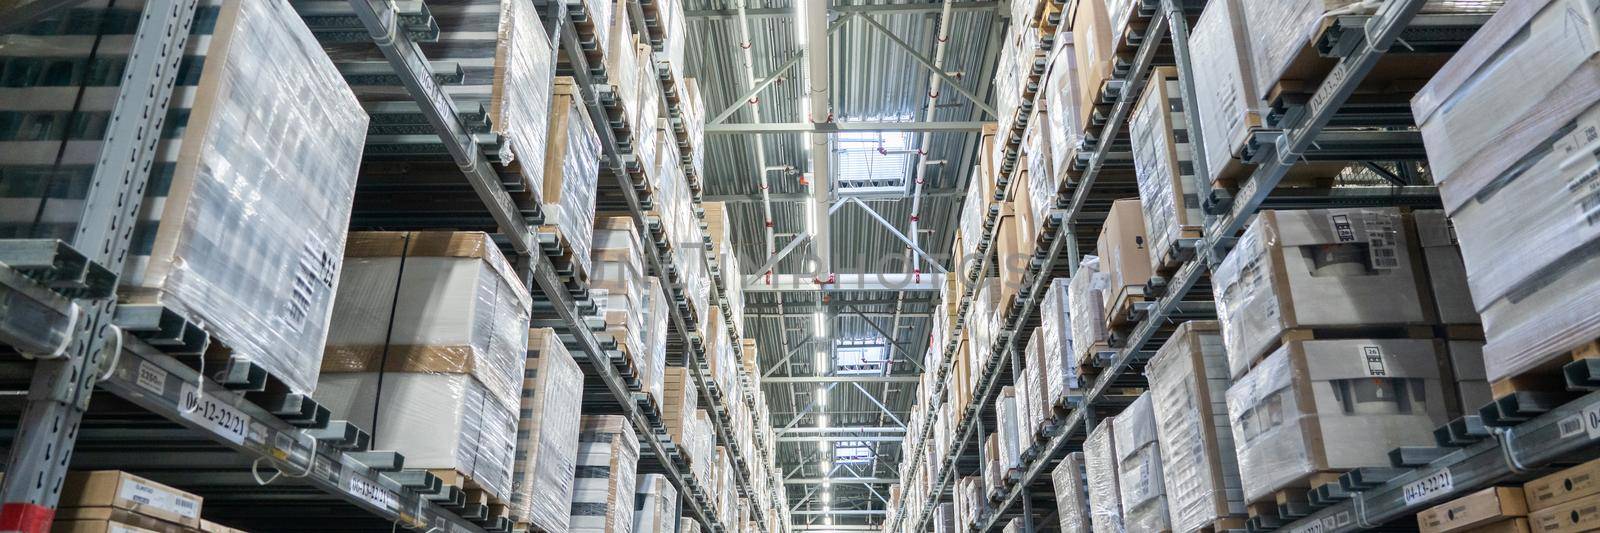 Rows of shelves with boxes in a modern warehouse